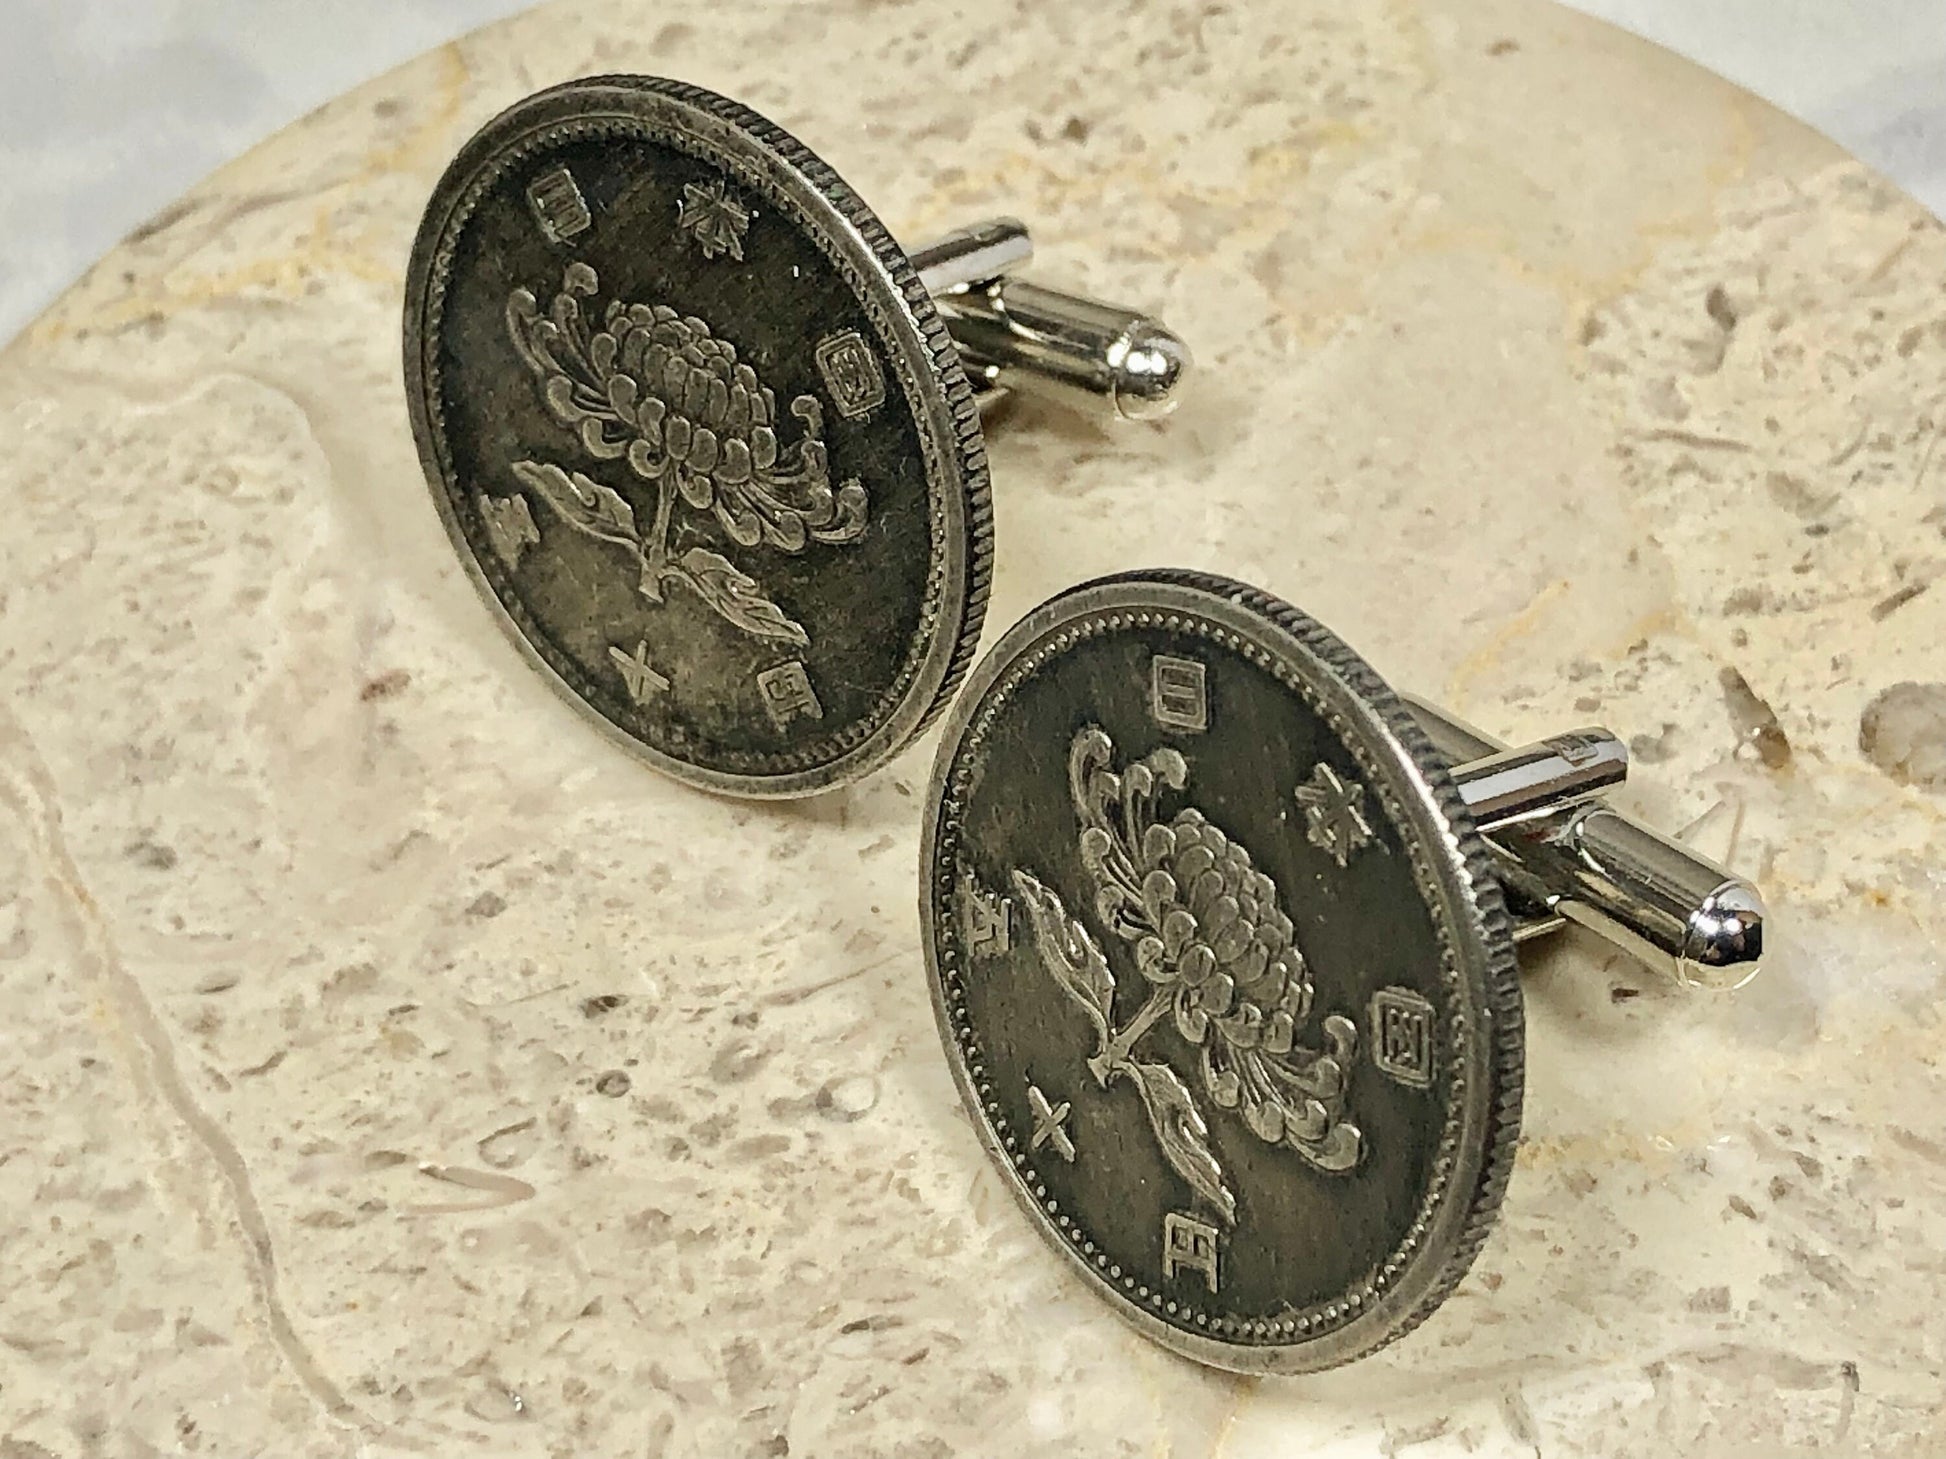 Japan Coin Cuff Links Japanese 500 Yen Custom Made Rare coins Handmade Jewelry Gift Friend Charm For Him Her World Coin Collector